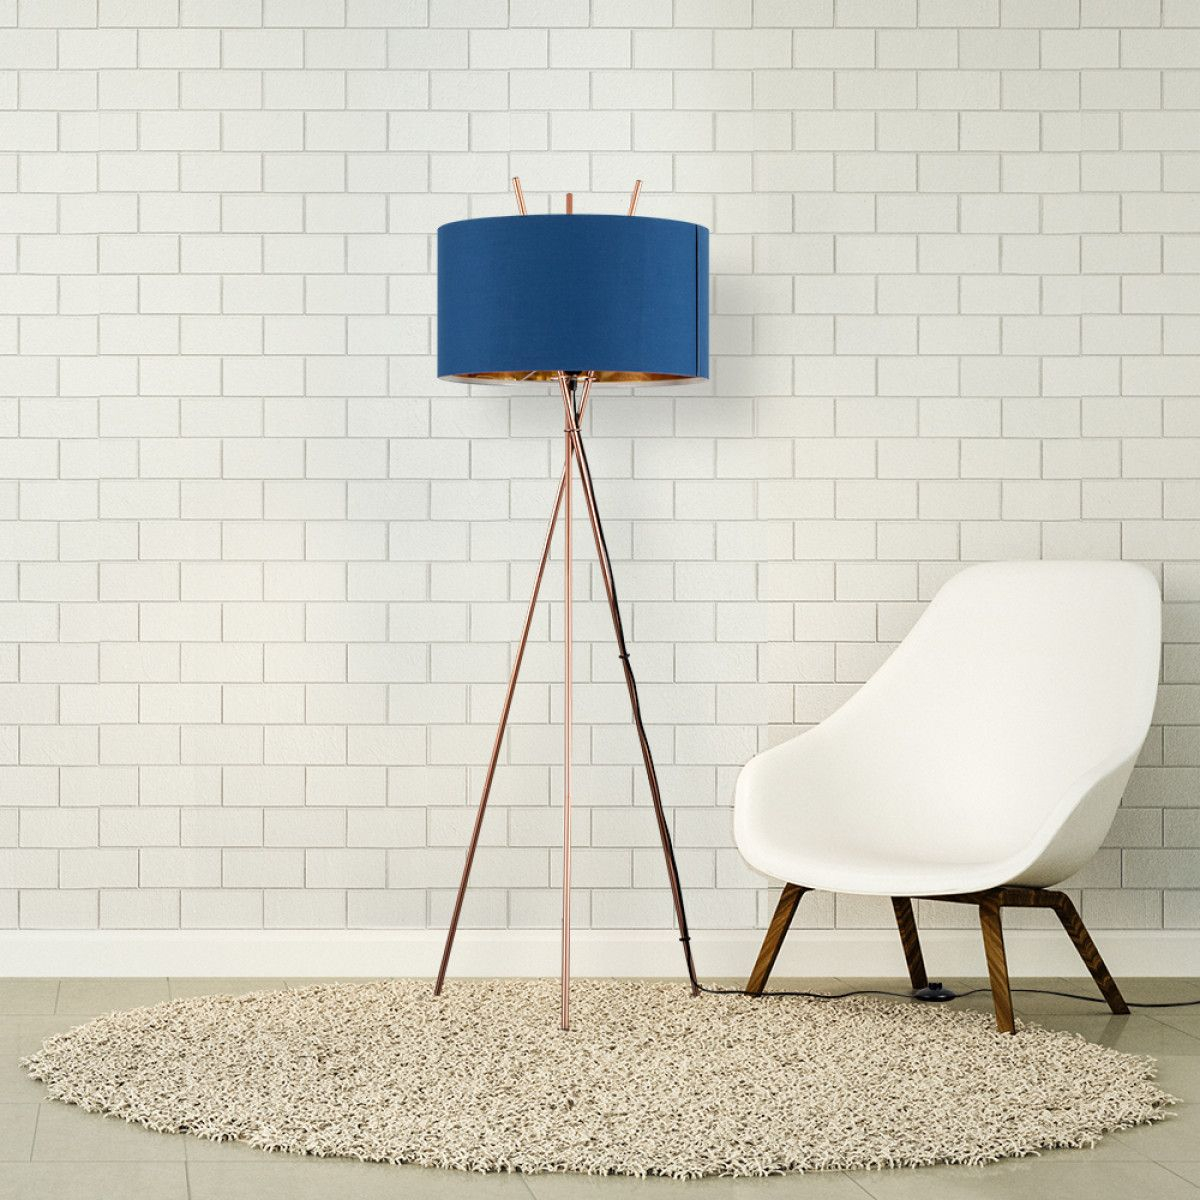 Crawford Tripod Floor Lamp Copper With Navy Blue Shade inside sizing 1200 X 1200